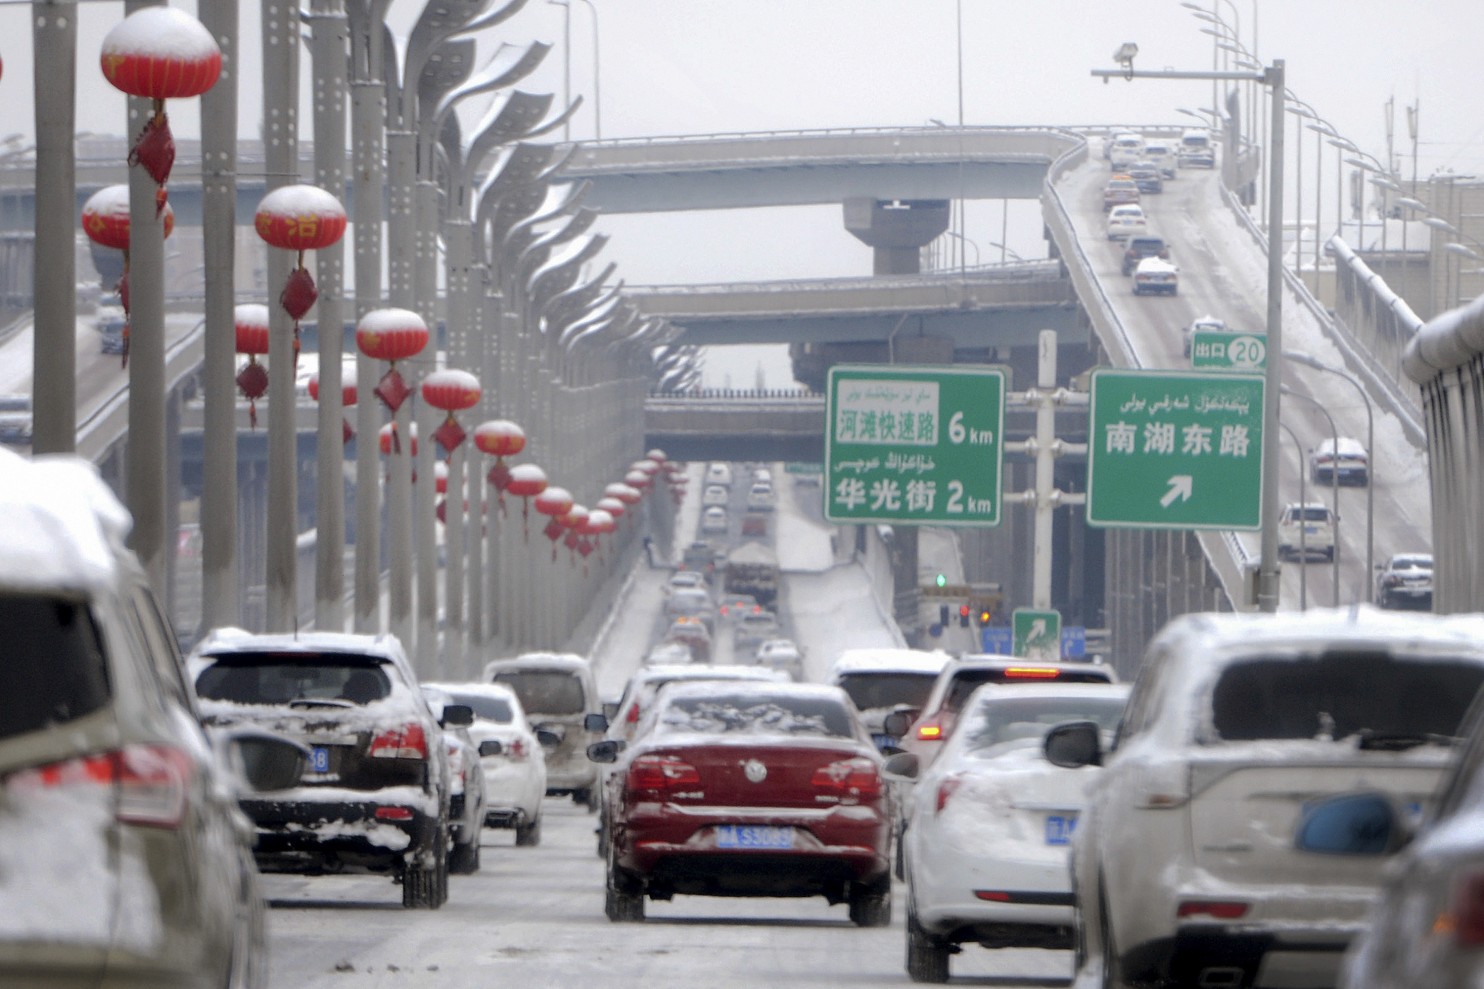 In this Monday, Feb. 20, 2017 photo released by Xinhua News Agency, vehicles run on the snow-covered road in Urumqi, capital of northwest China’s Xinjiang Uygur Autonomous Region. A prefecture in China’s Xinjiang region is requiring all vehicles to install satellite tracking systems as part of stepped-up measures against violent attacks. Traffic police in Bayingolin Mongol Autonomous Prefecture announced the regulation on Sunday, shortly after thousands of heavily armed police paraded in Urumqi and Communis